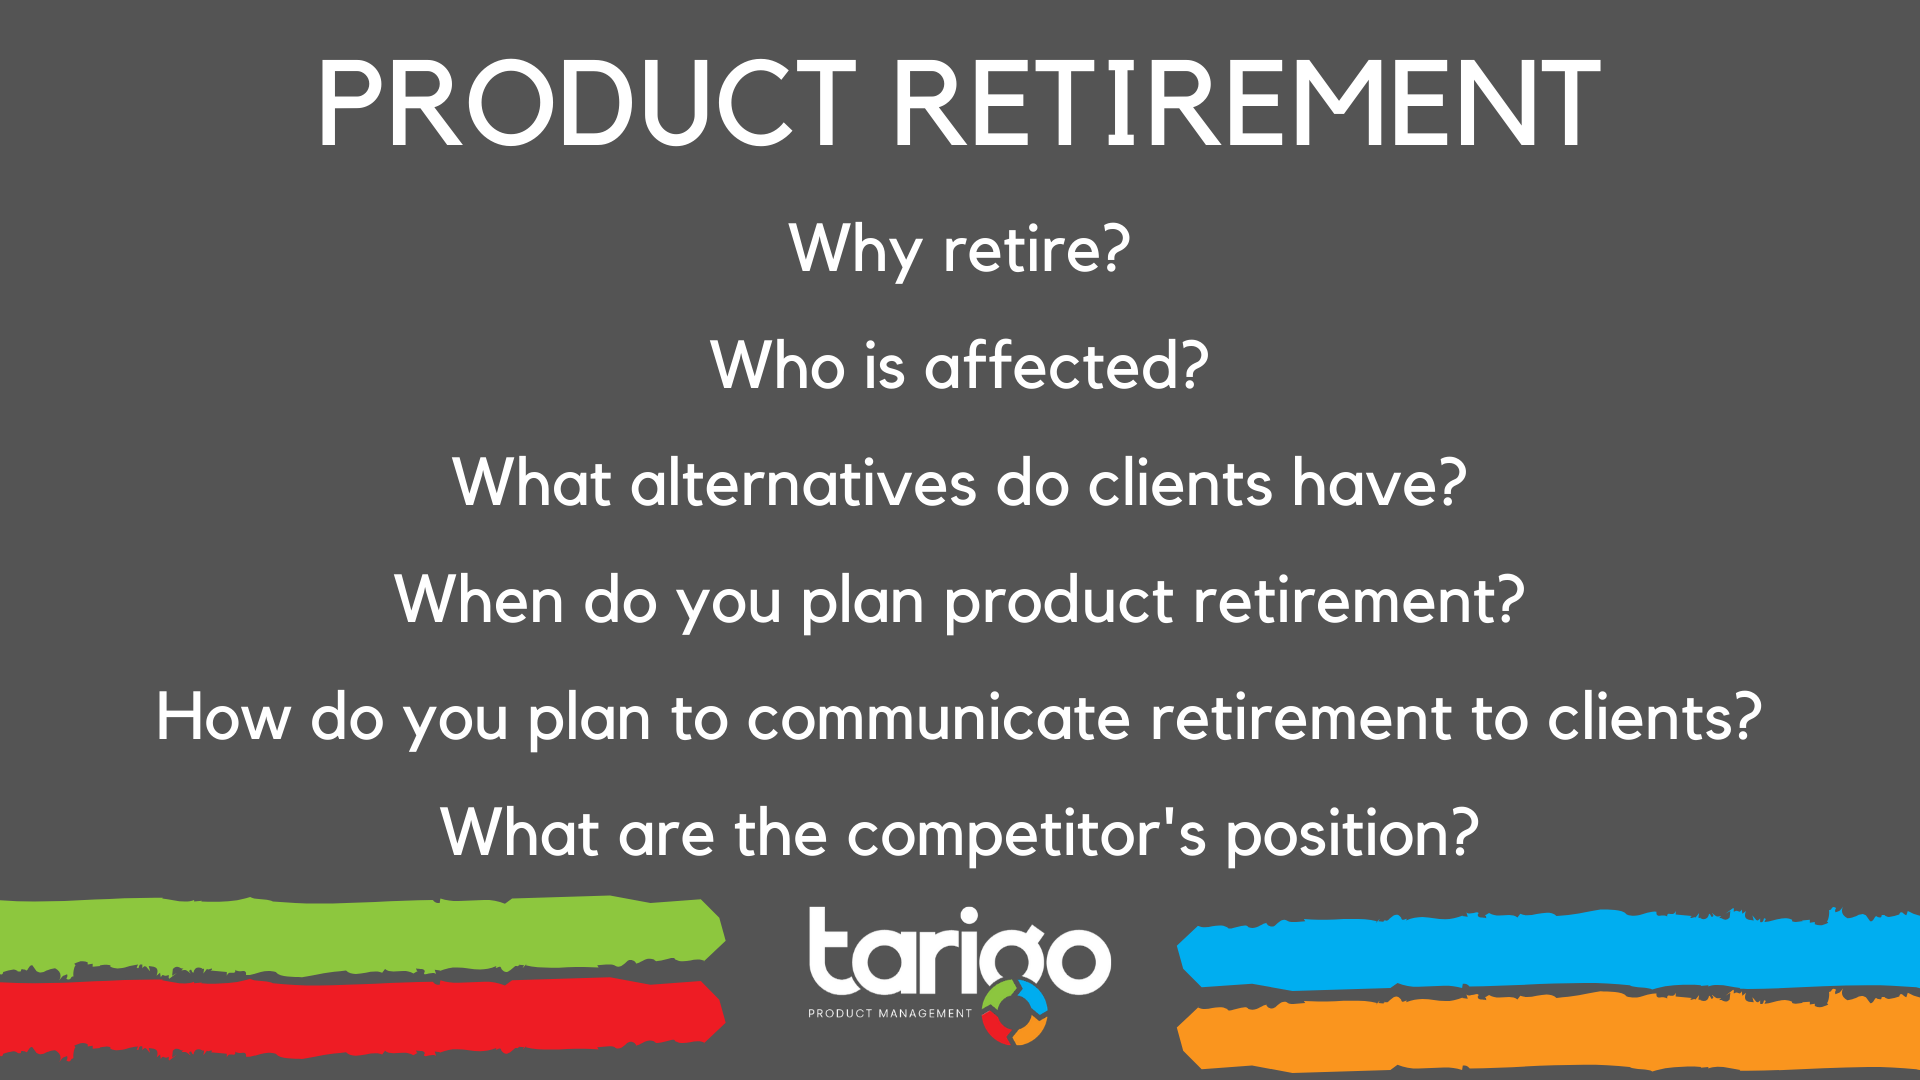 Thinking of product retirement??